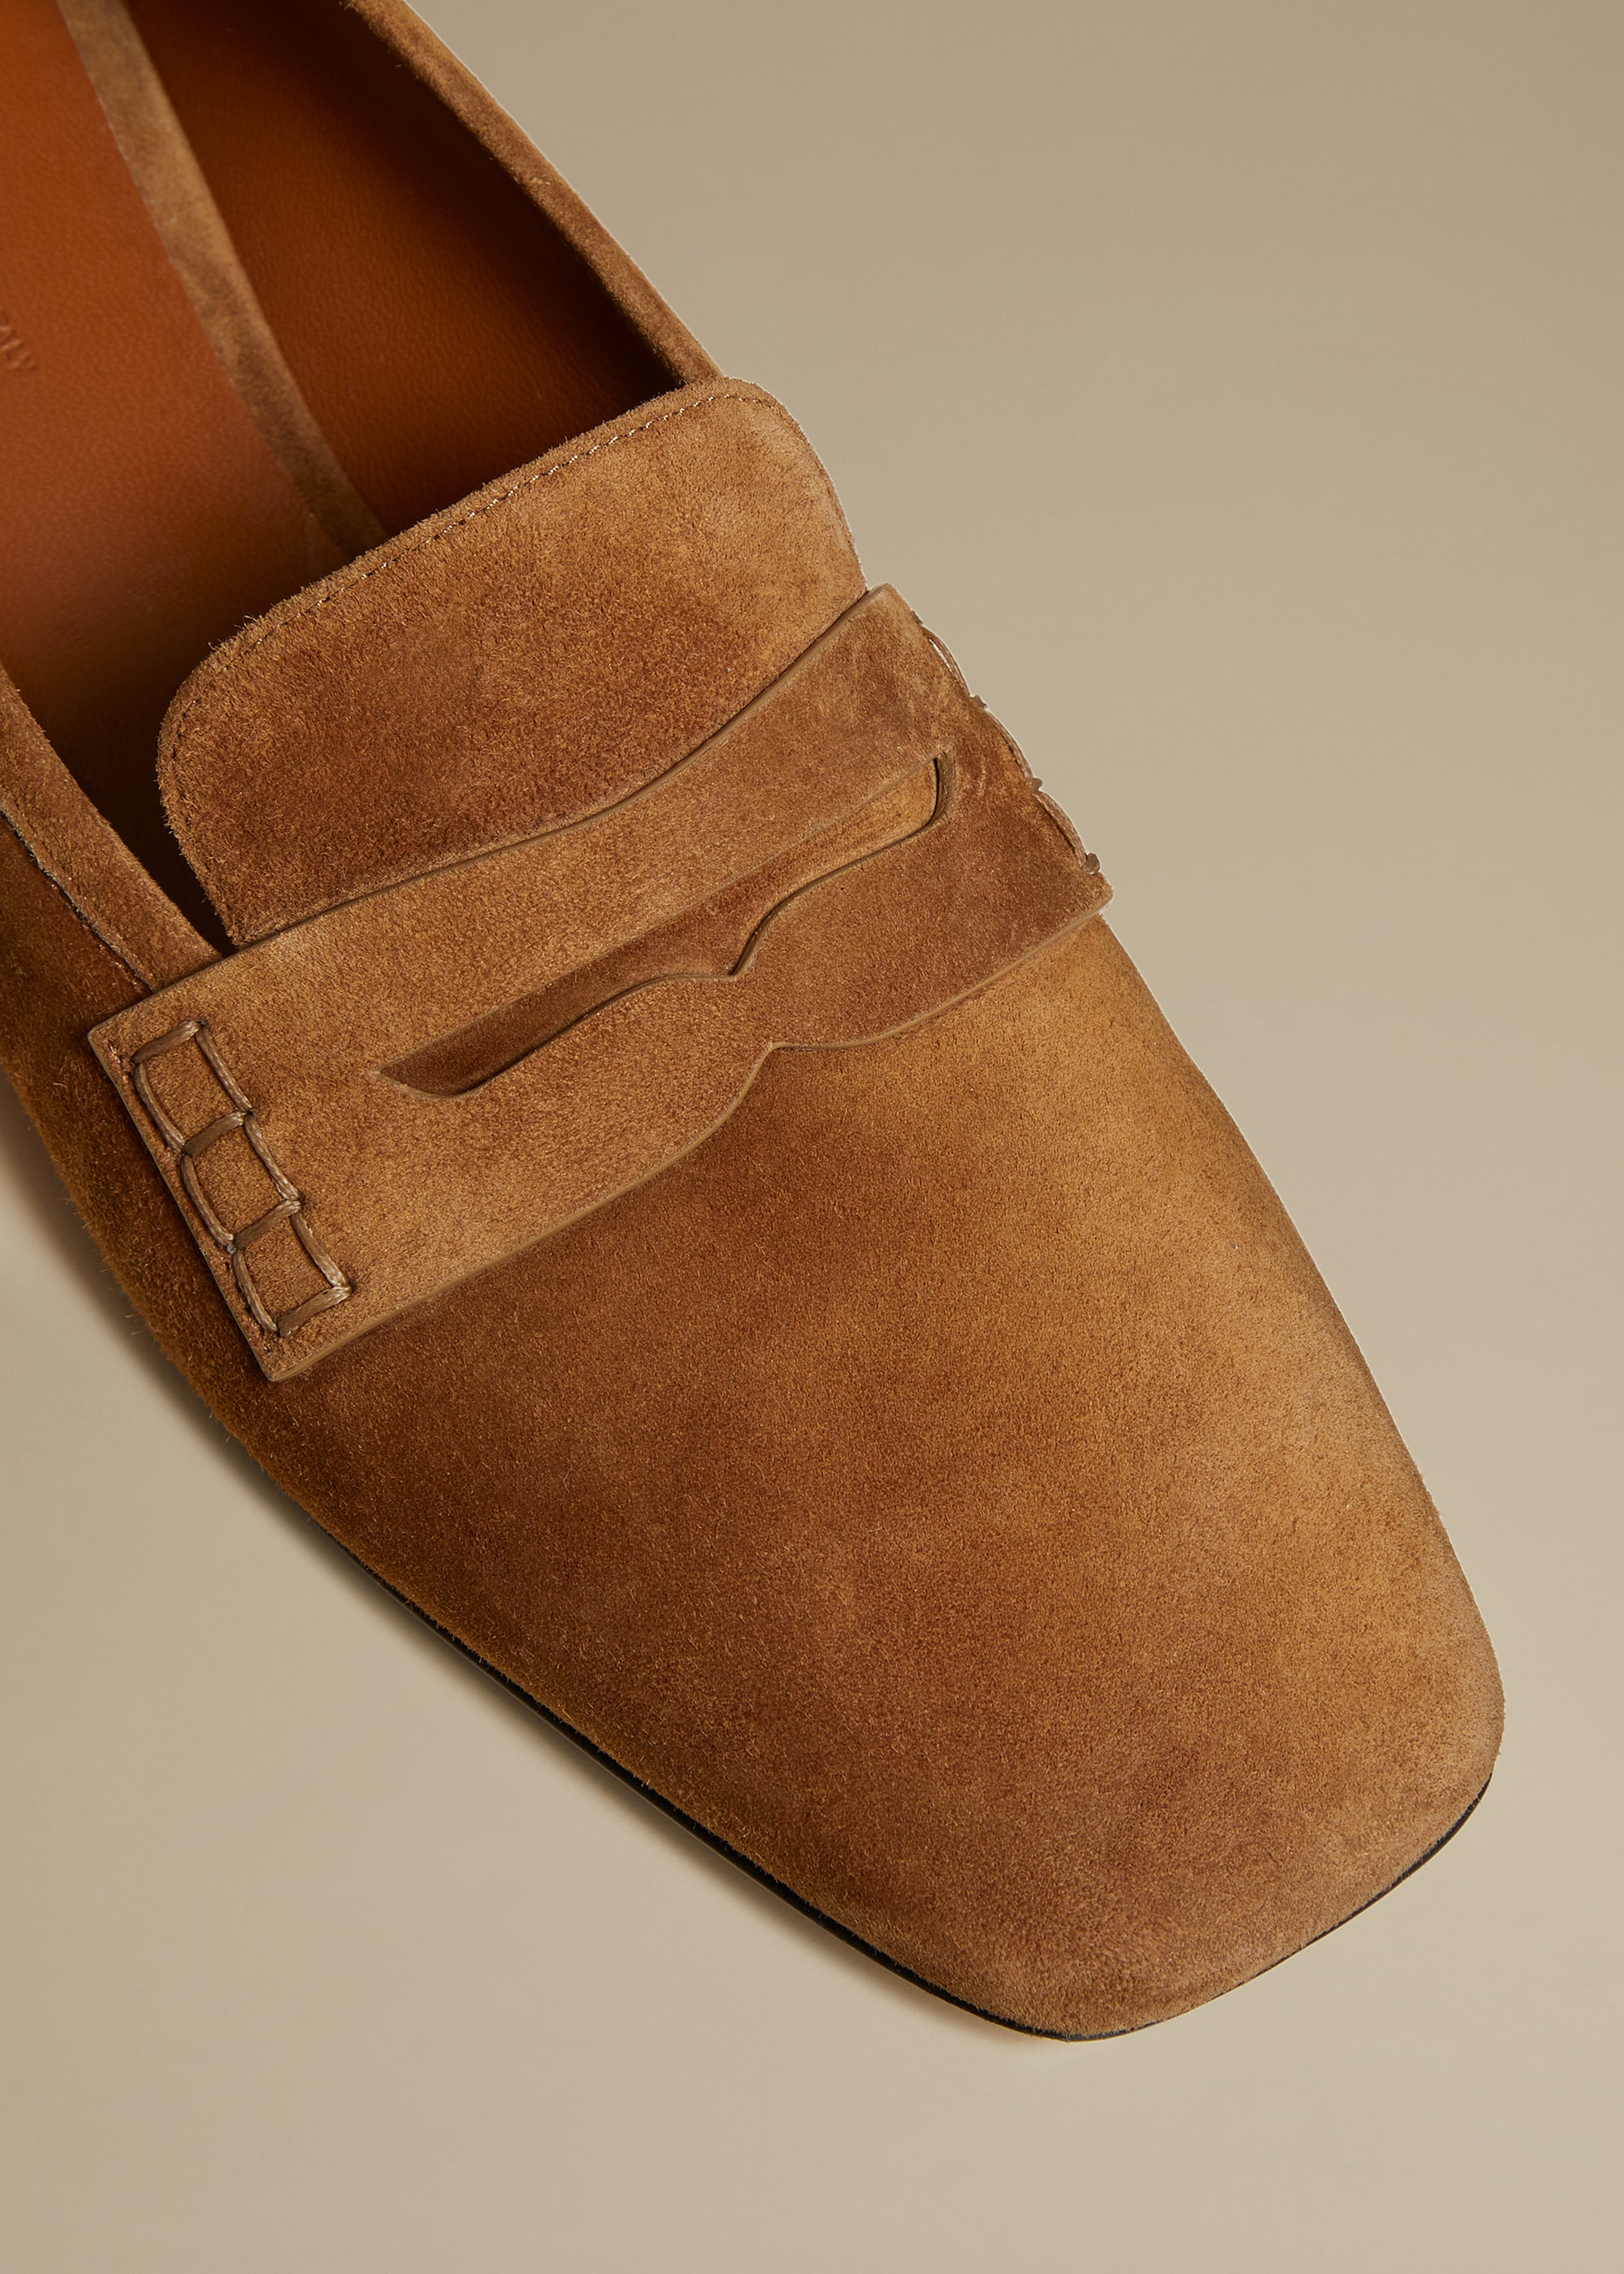 Carlisle loafer in leather - Caramel